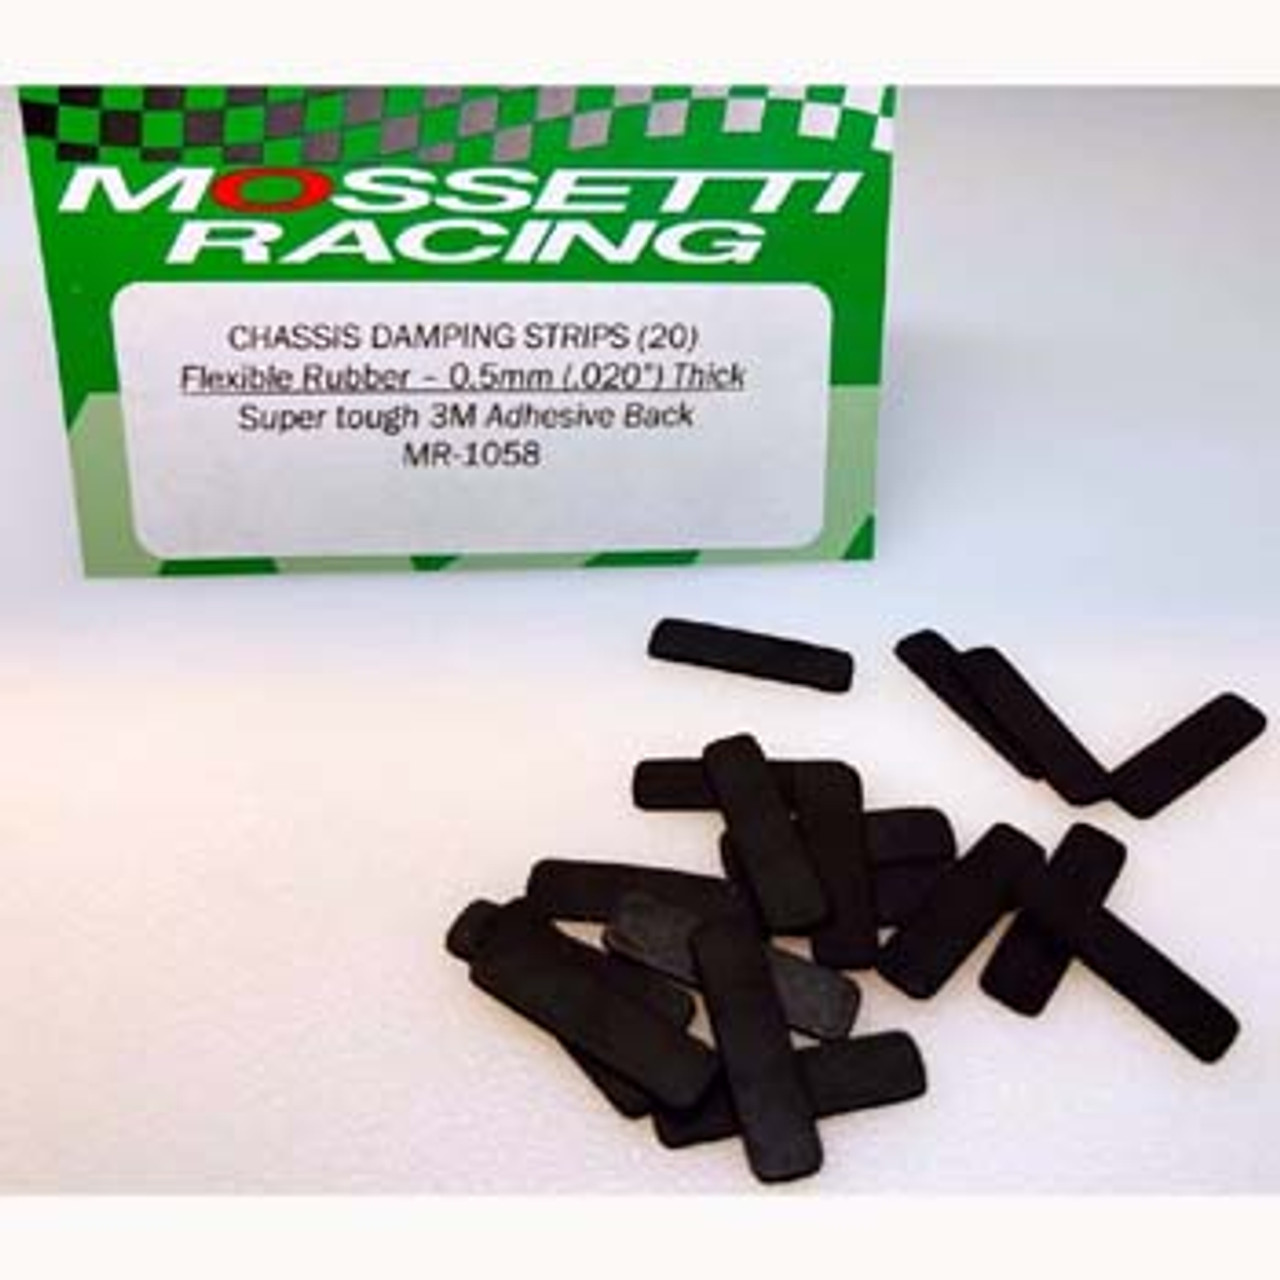 MOSSETTI CHASSIS DAMPING RUBBER STRIPS (20) WITH "3M" ADHESIVE BACKING TAPE MR1058